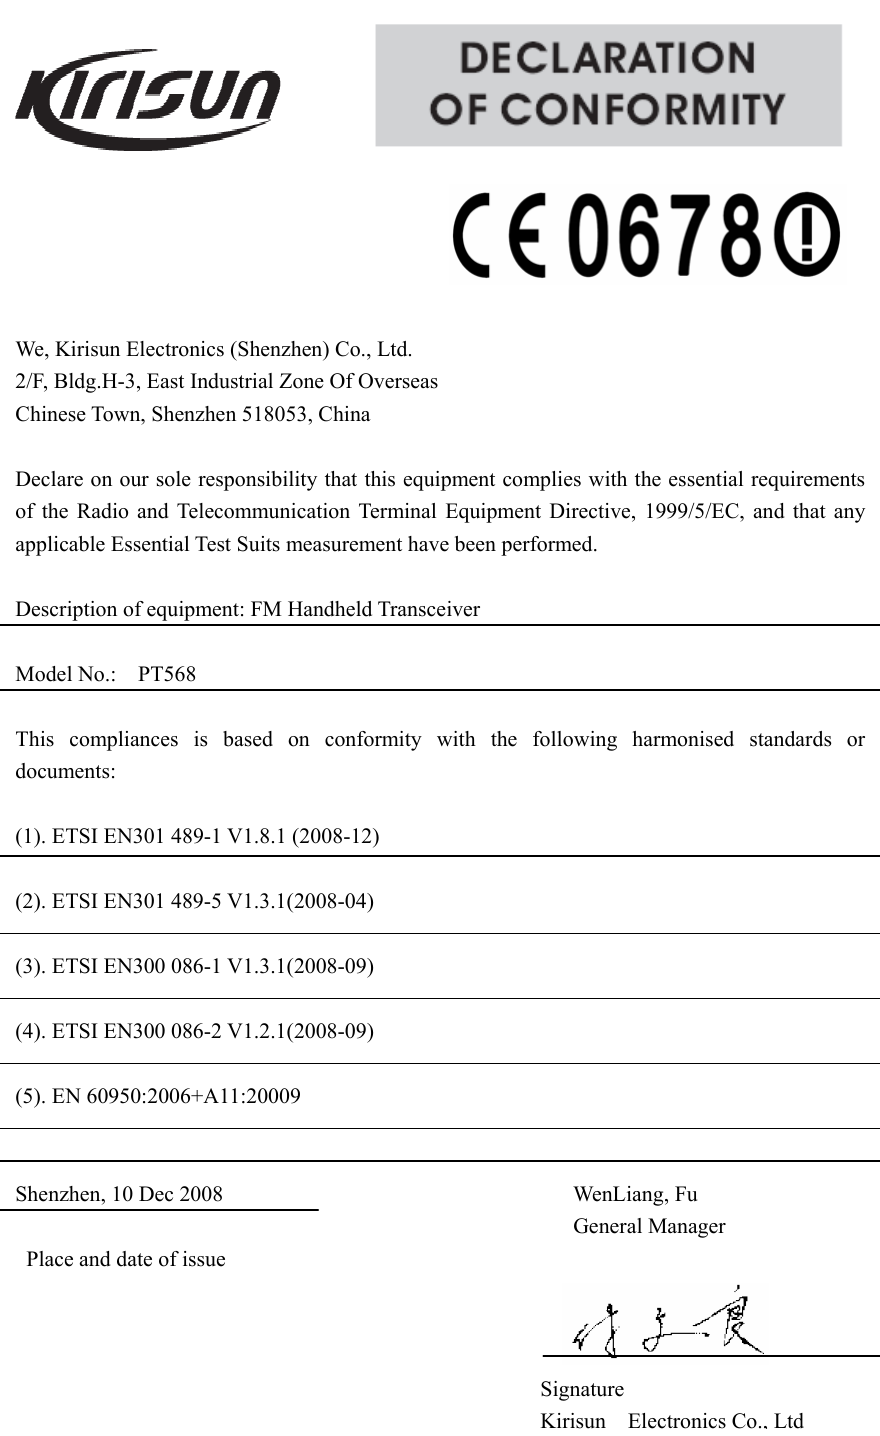                                                    We, Kirisun Electronics (Shenzhen) Co., Ltd.            2/F, Bldg.H-3, East Industrial Zone Of Overseas                 Chinese Town, Shenzhen 518053, China  Declare on our sole responsibility that this equipment complies with the essential requirements of the Radio and Telecommunication Terminal Equipment Directive, 1999/5/EC, and that any applicable Essential Test Suits measurement have been performed.  Description of equipment: FM Handheld Transceiver  Model No.:  PT568                                                                This compliances is based on conformity with the following harmonised standards or documents:  (1). ETSI EN301 489-1 V1.8.1 (2008-12)  (2). ETSI EN301 489-5 V1.3.1(2008-04)  (3). ETSI EN300 086-1 V1.3.1(2008-09)  (4). ETSI EN300 086-2 V1.2.1(2008-09)  (5). EN 60950:2006+A11:20009   Shenzhen, 10 Dec 2008                                WenLiang, Fu General Manager Place and date of issue             Signature Kirisun Electronics Co., Ltd